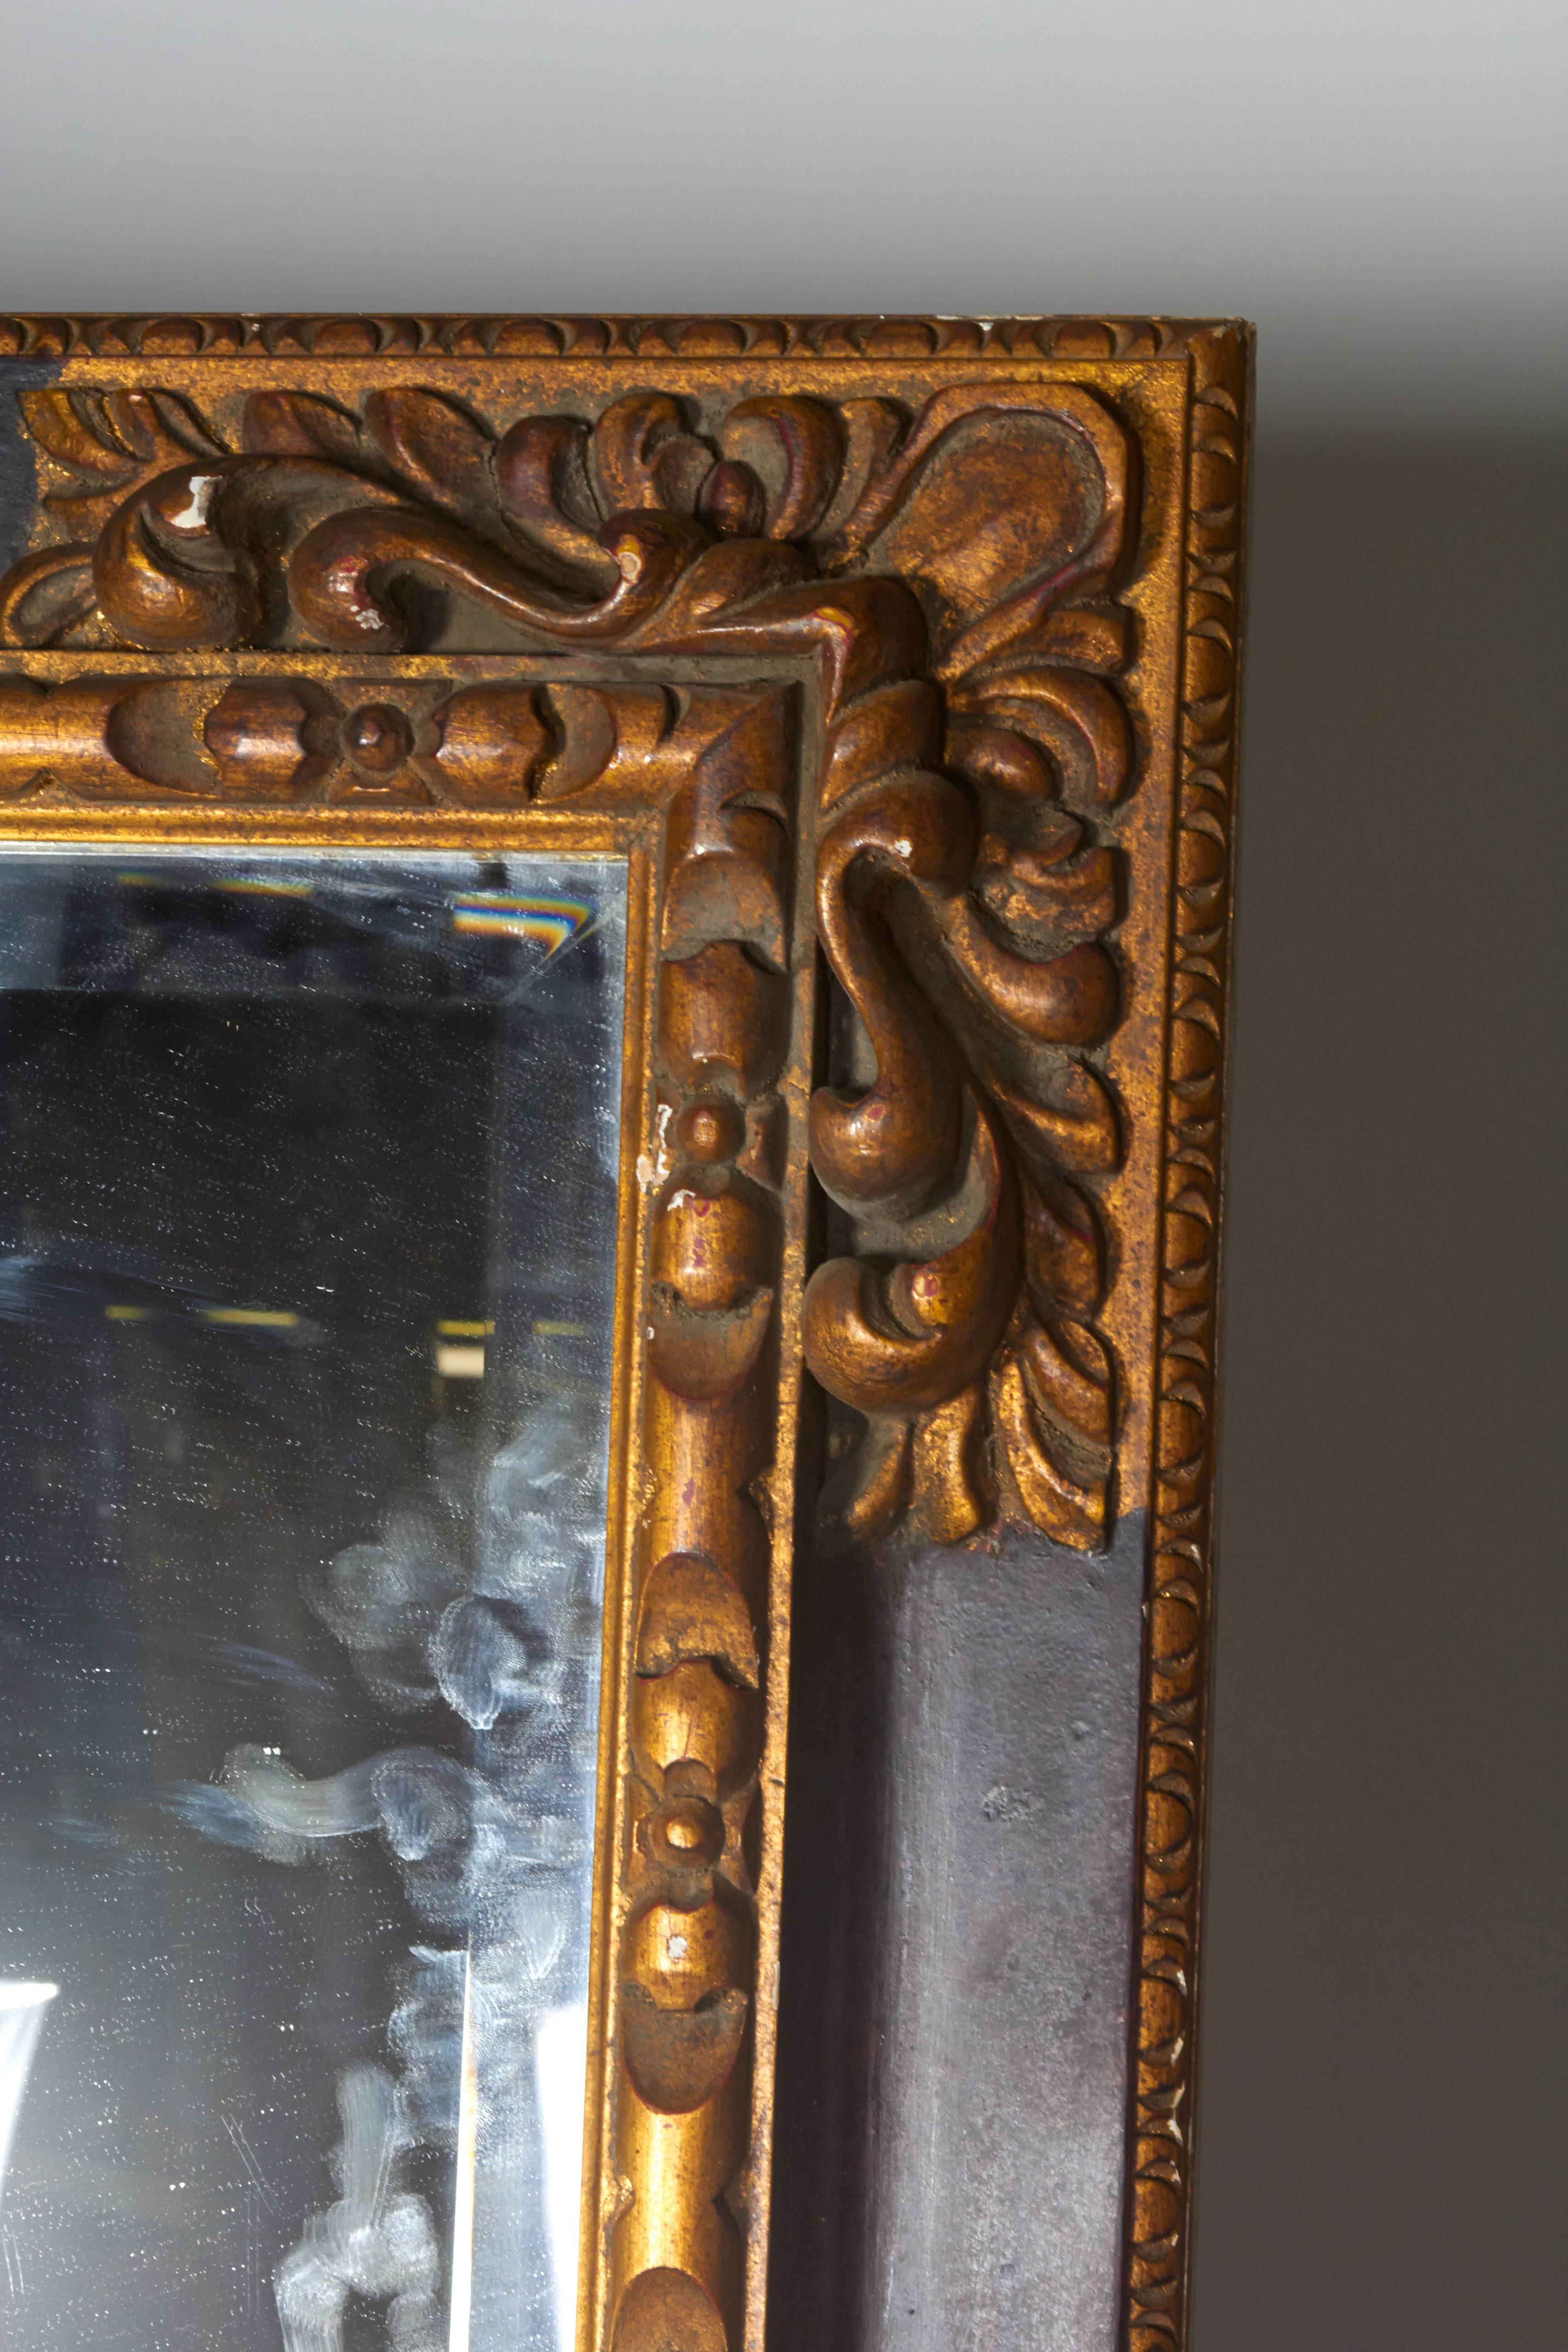 Impressively large ornate frame. Delicate hand-carvings around the mirror. Frame ships in wood crate.

*Not available for sale or to ship in the state of California.